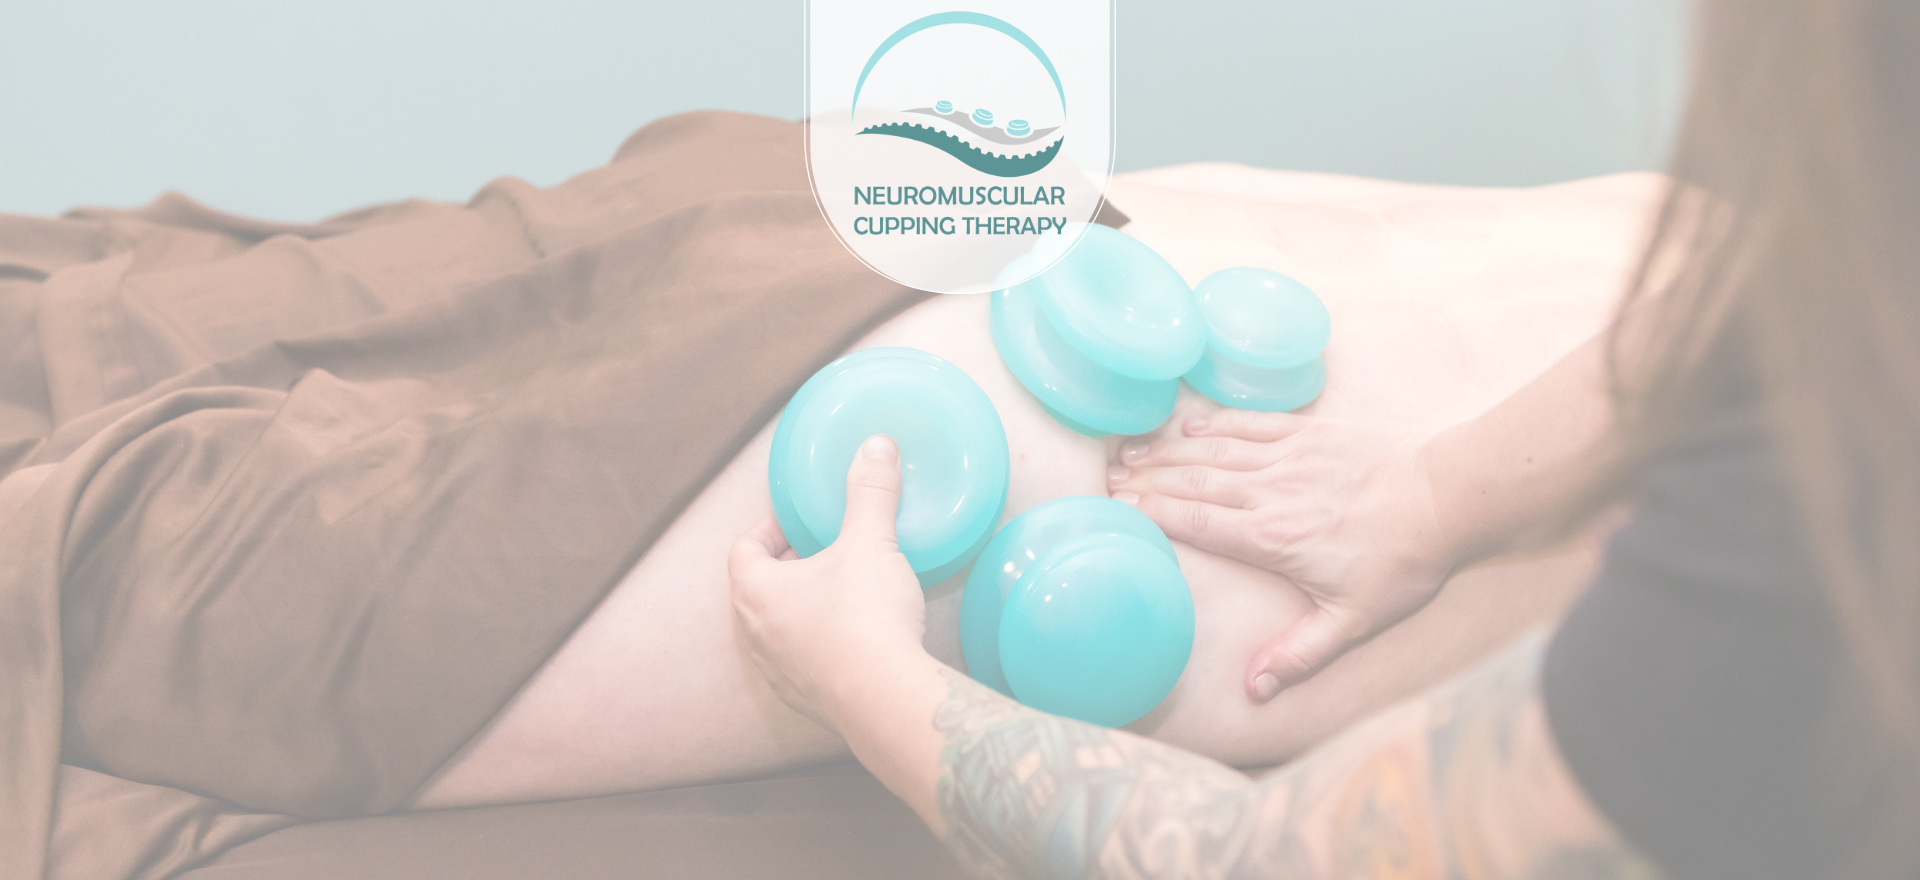 Neuromuscular Cupping Therapy Training Online CEU Course for Massage Therapists